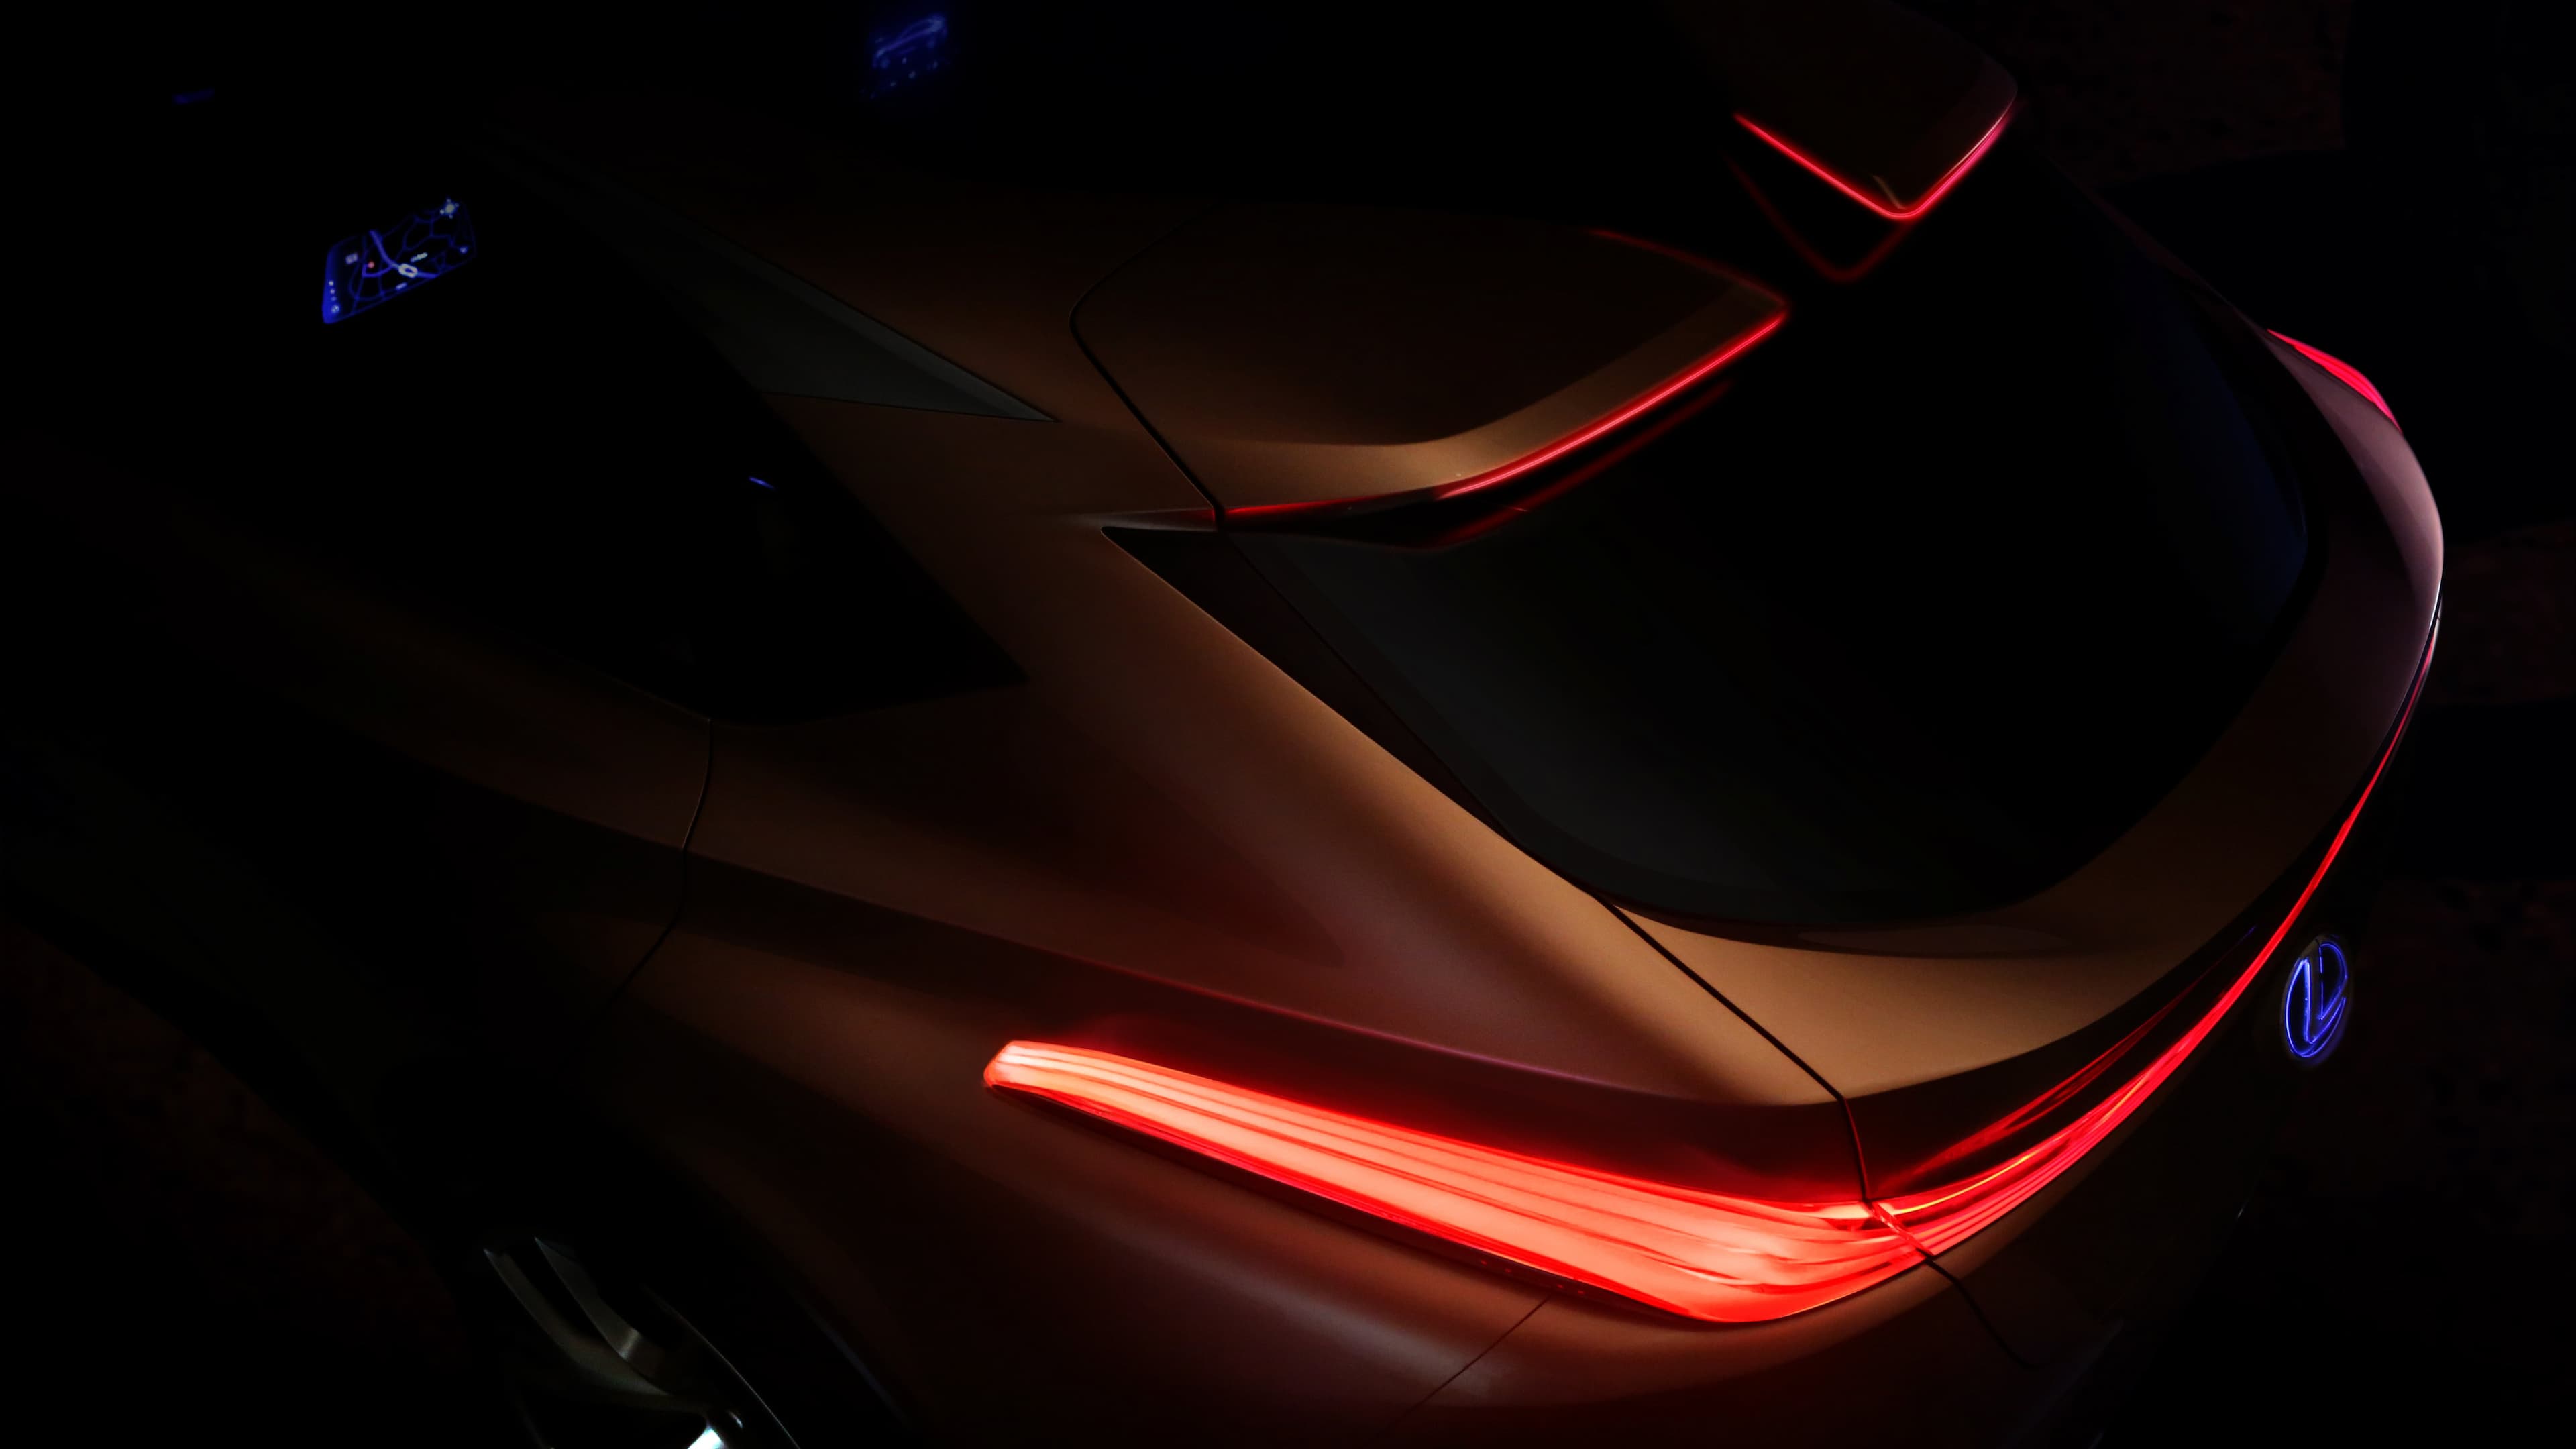 Lexus Is Bringing a New Concept to Detroit